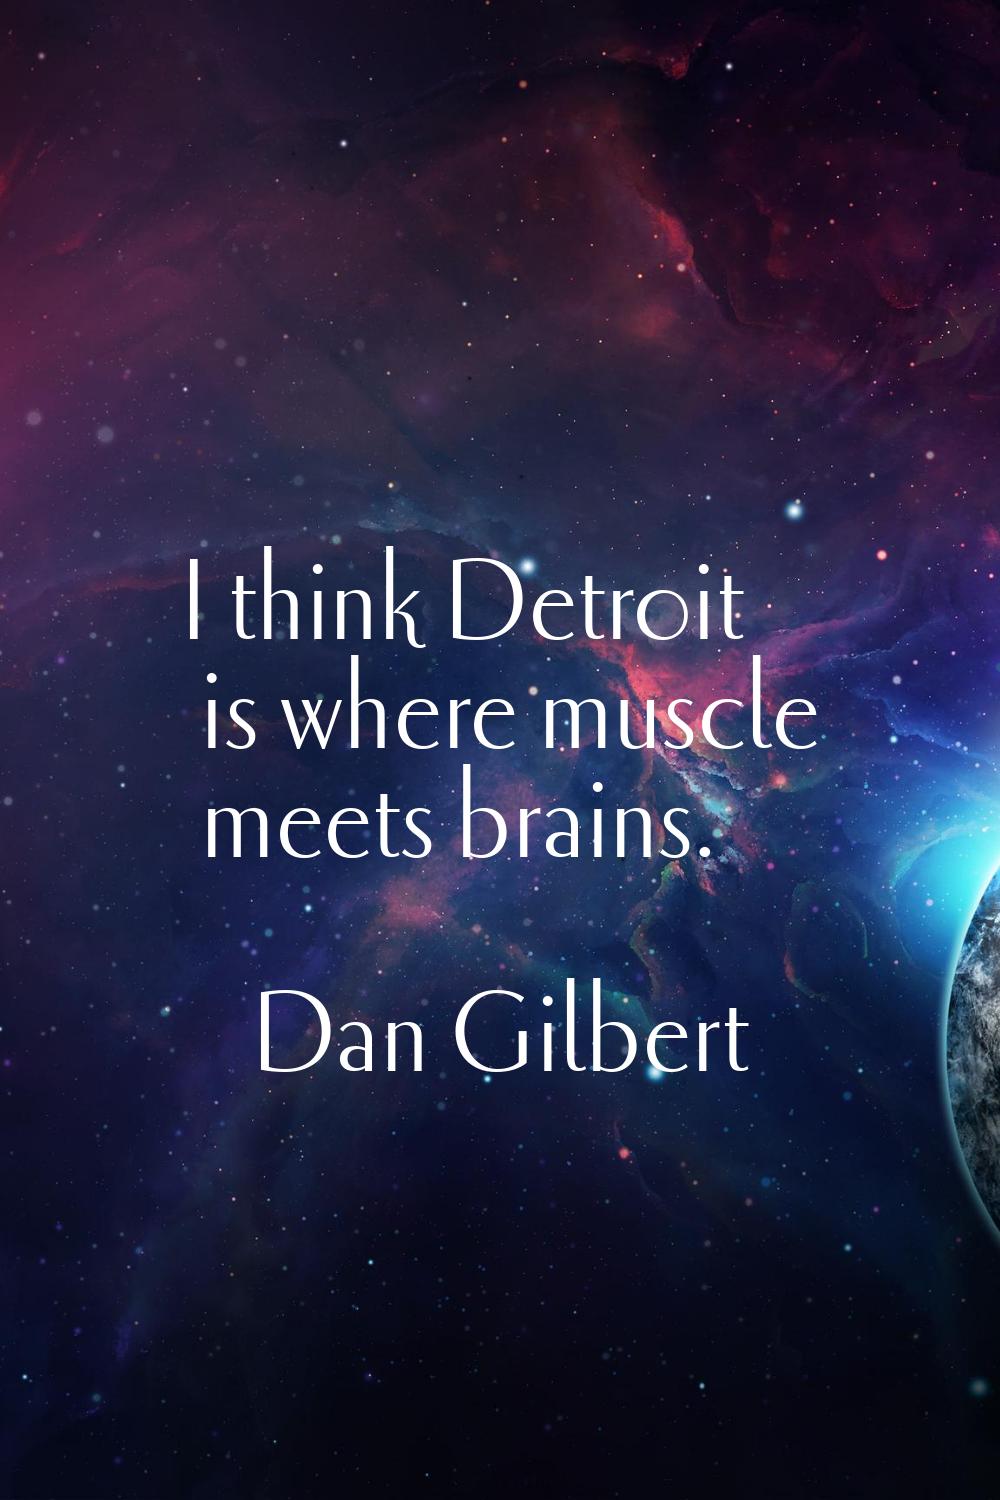 I think Detroit is where muscle meets brains.